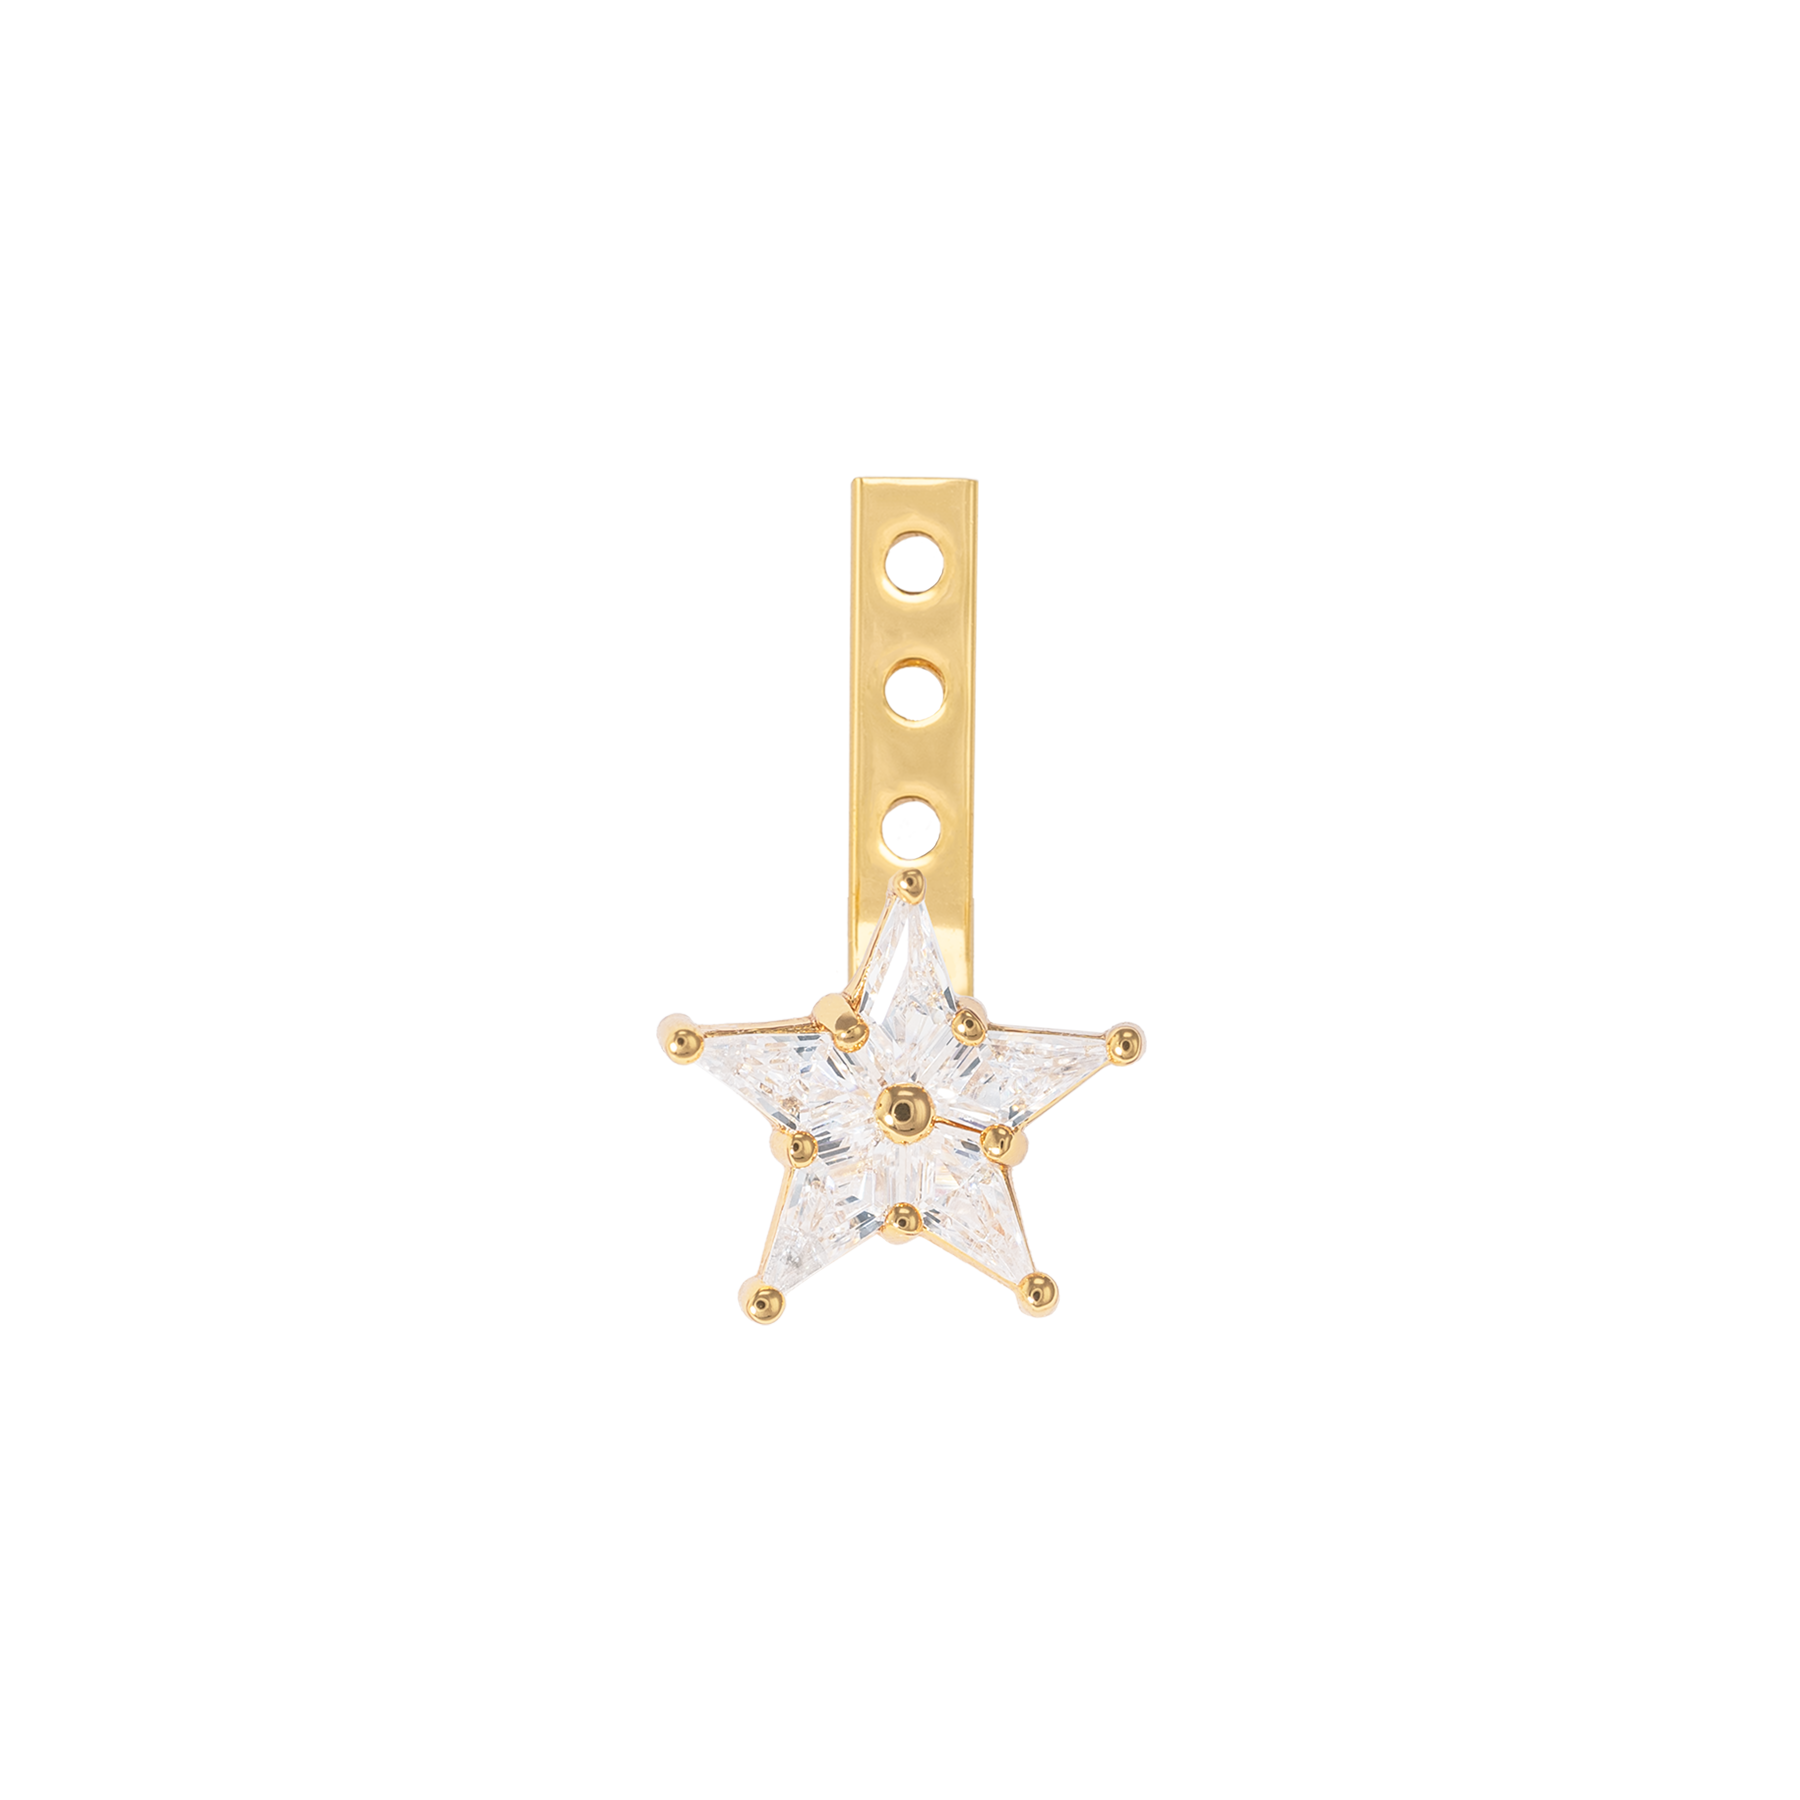 Image of Stud charm no. 9 from Emilia by Bon Dep